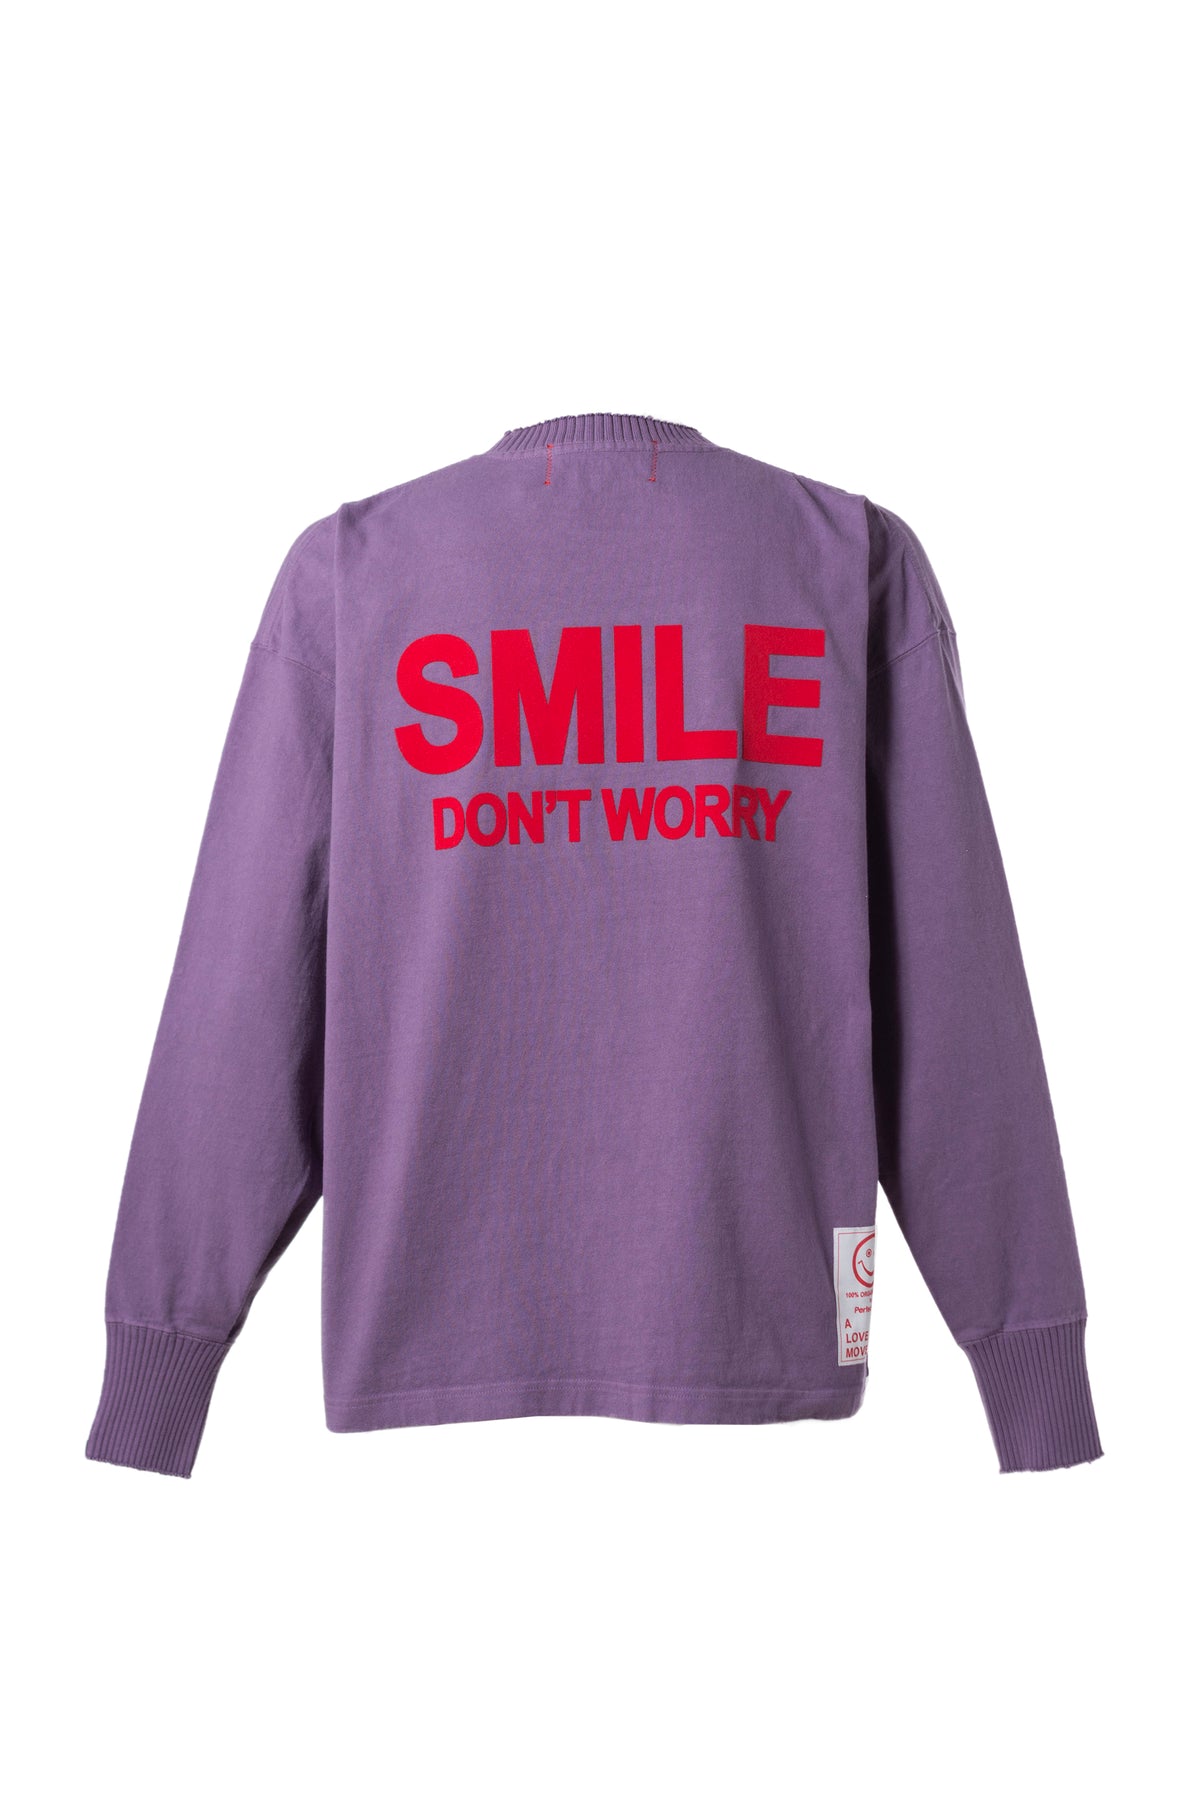 Perfect ribs BASIC LONG SLEEVE T-SHIRTS "SMILE DON'T WORRY" / PUR